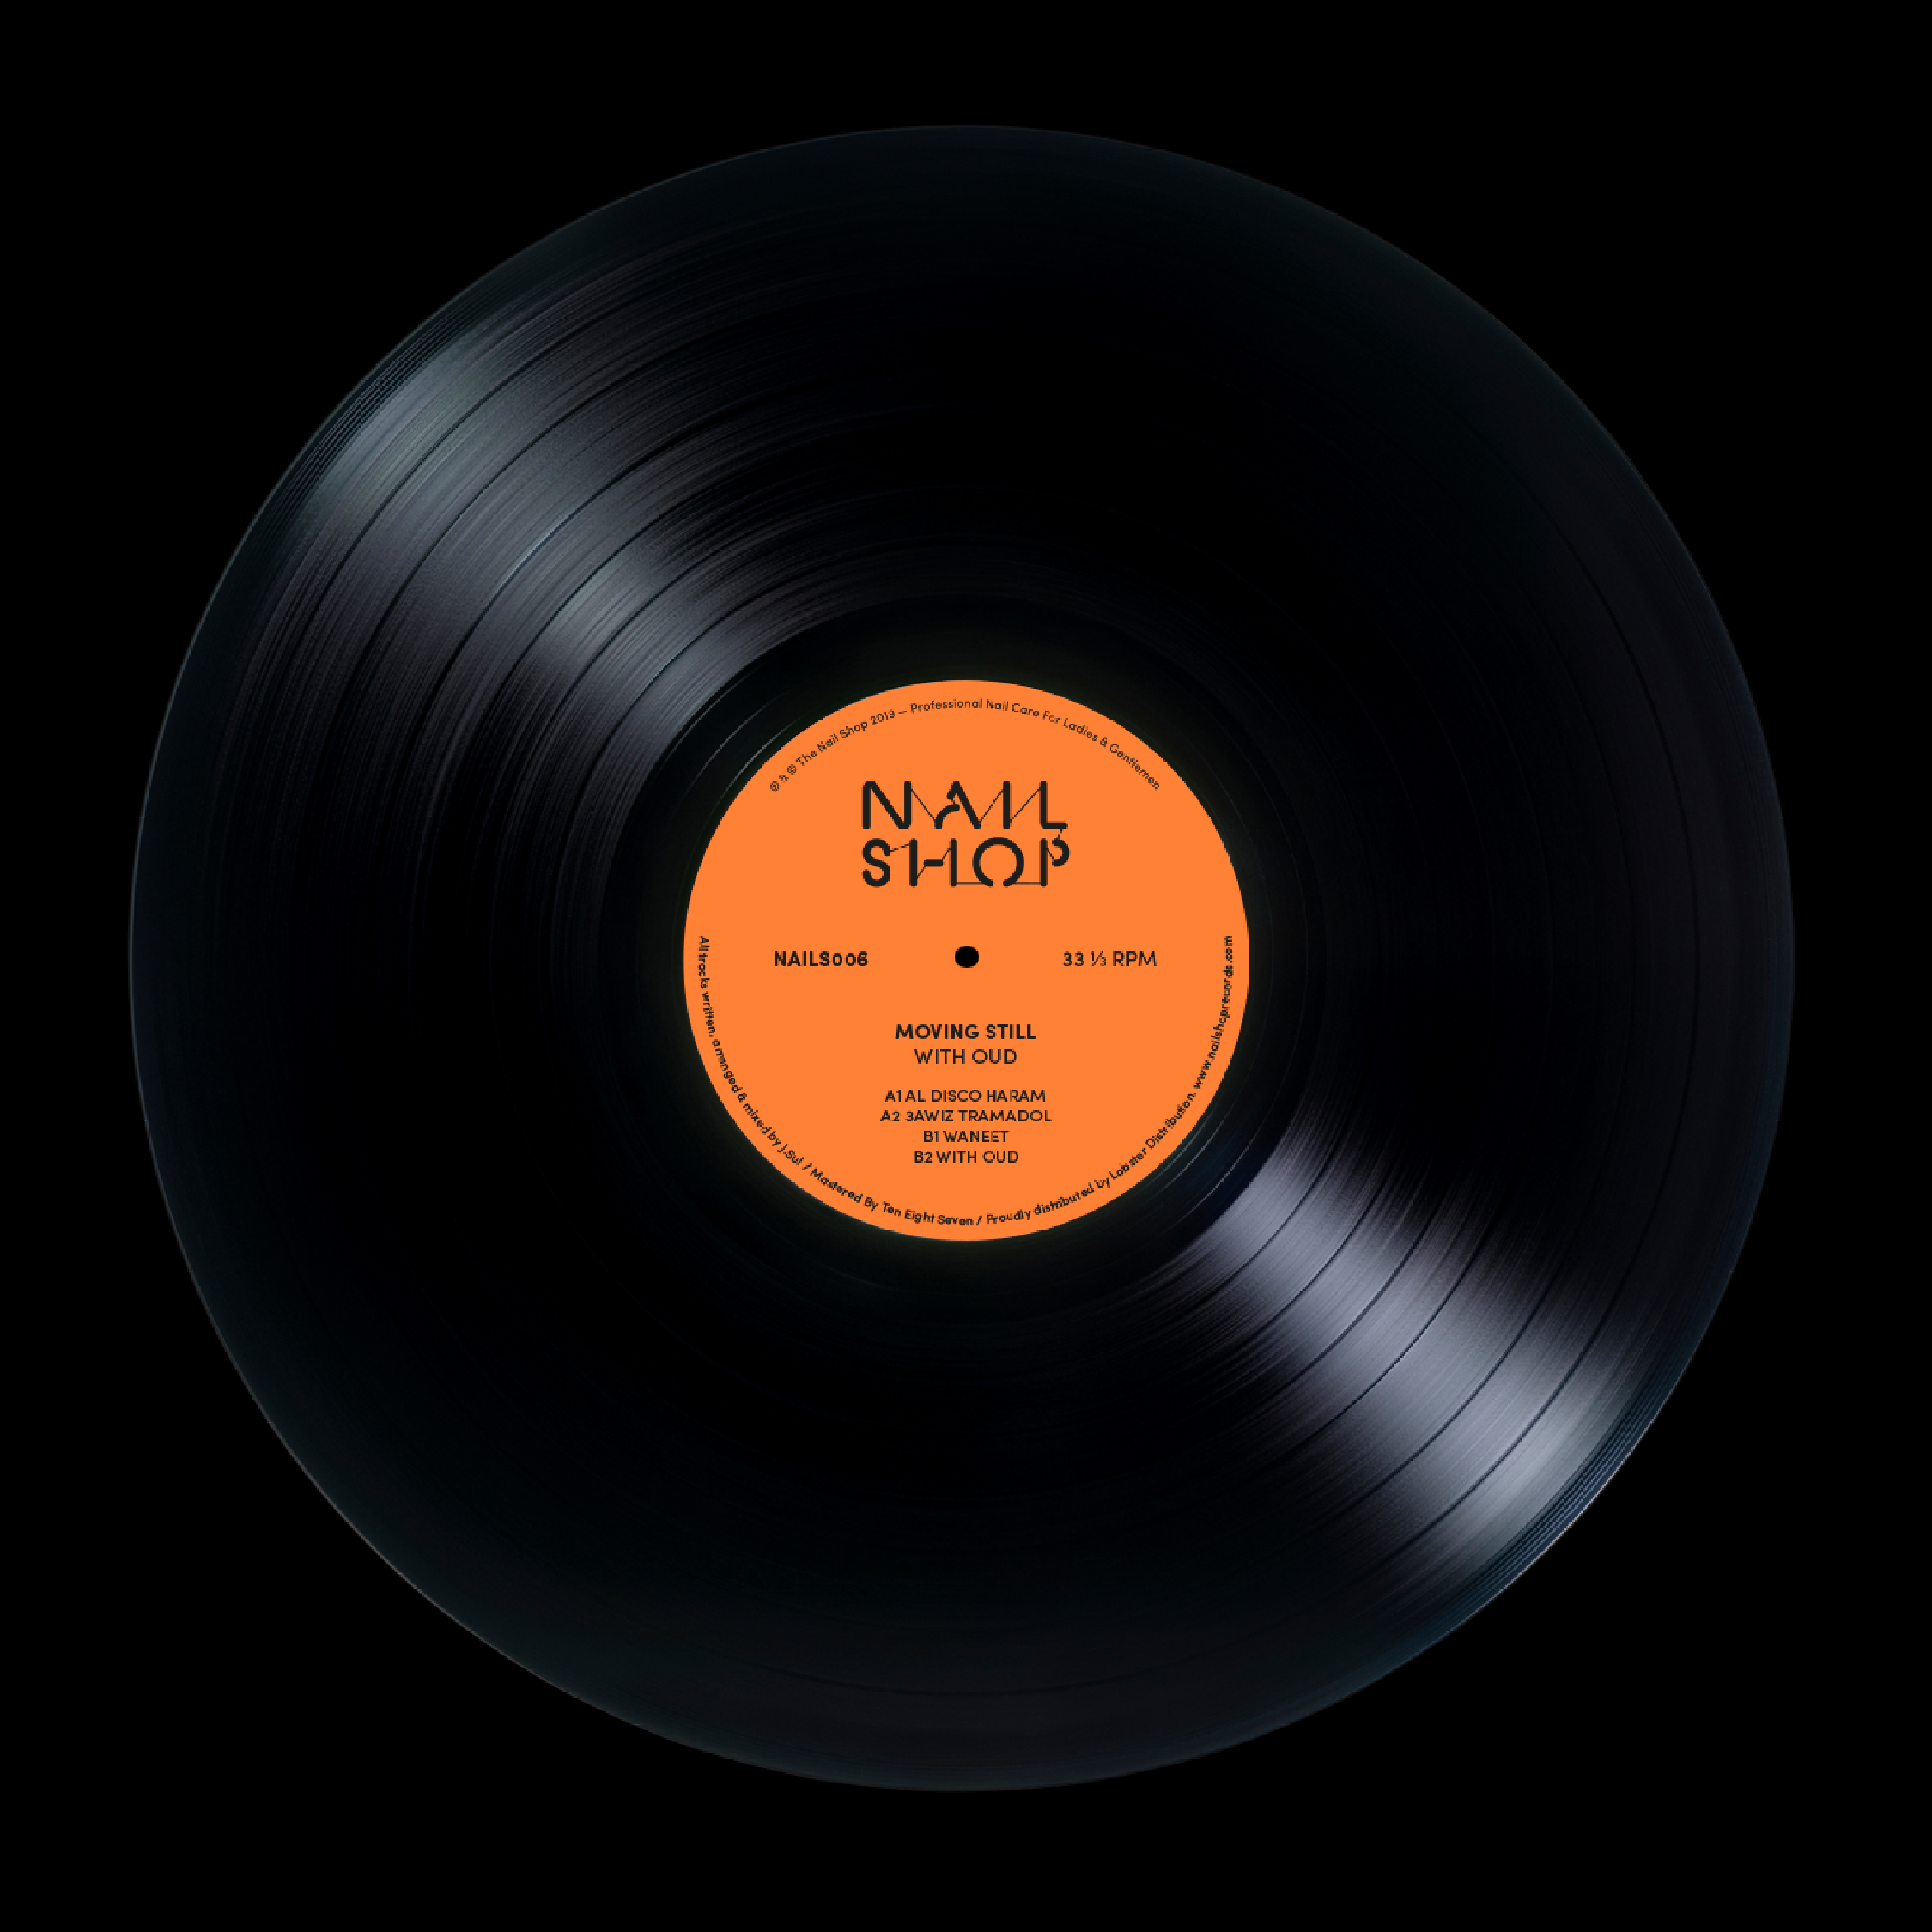 The Nail Shop Records, NS006, Movging Still, Side A